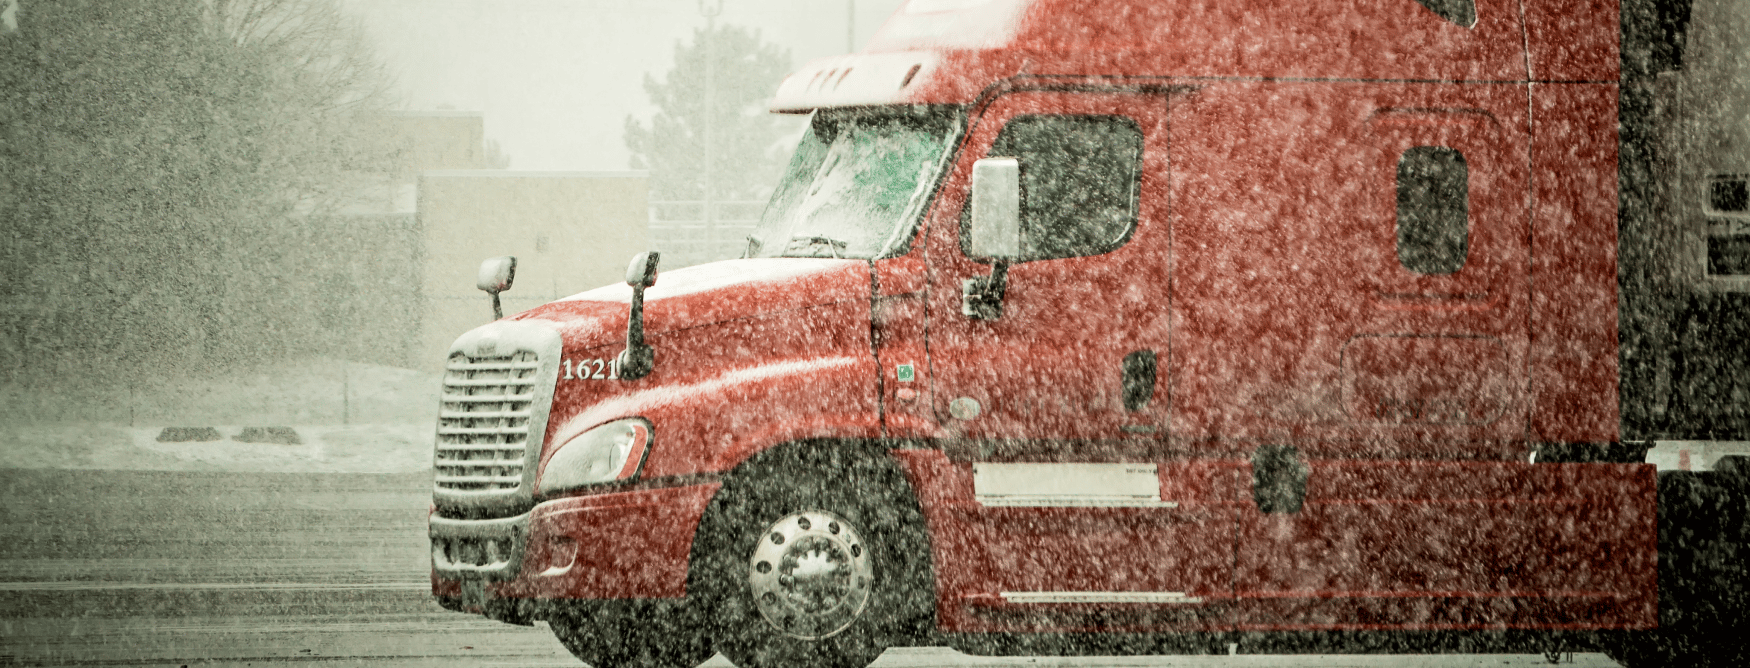 truck driving in adverse conditions